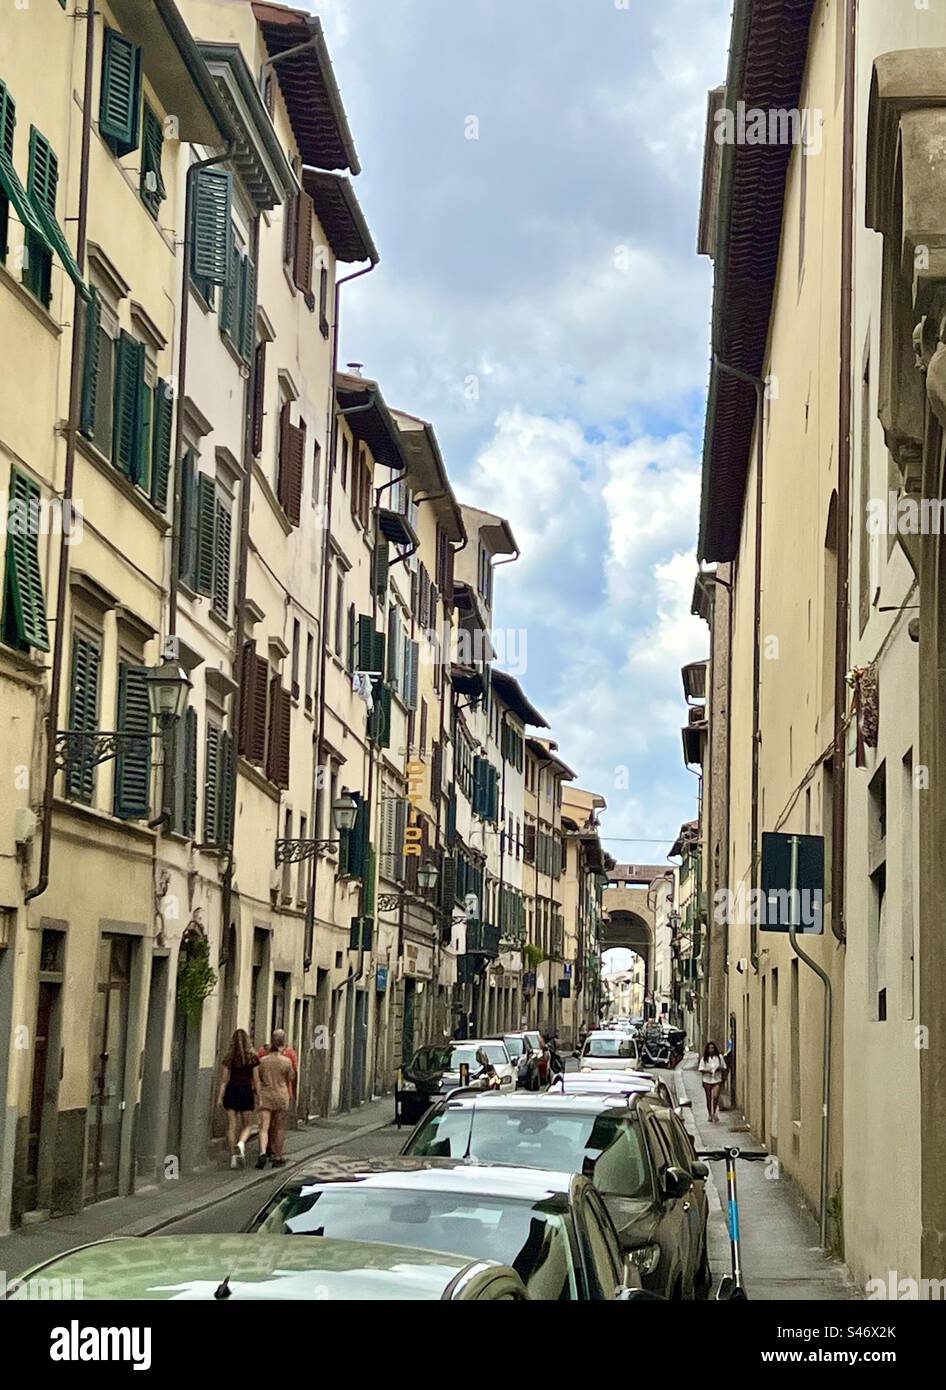 View on Borgo San Frediano street with the arched structure peeking out in background that had served as a historical gate to the city center of Florence. Stock Photo